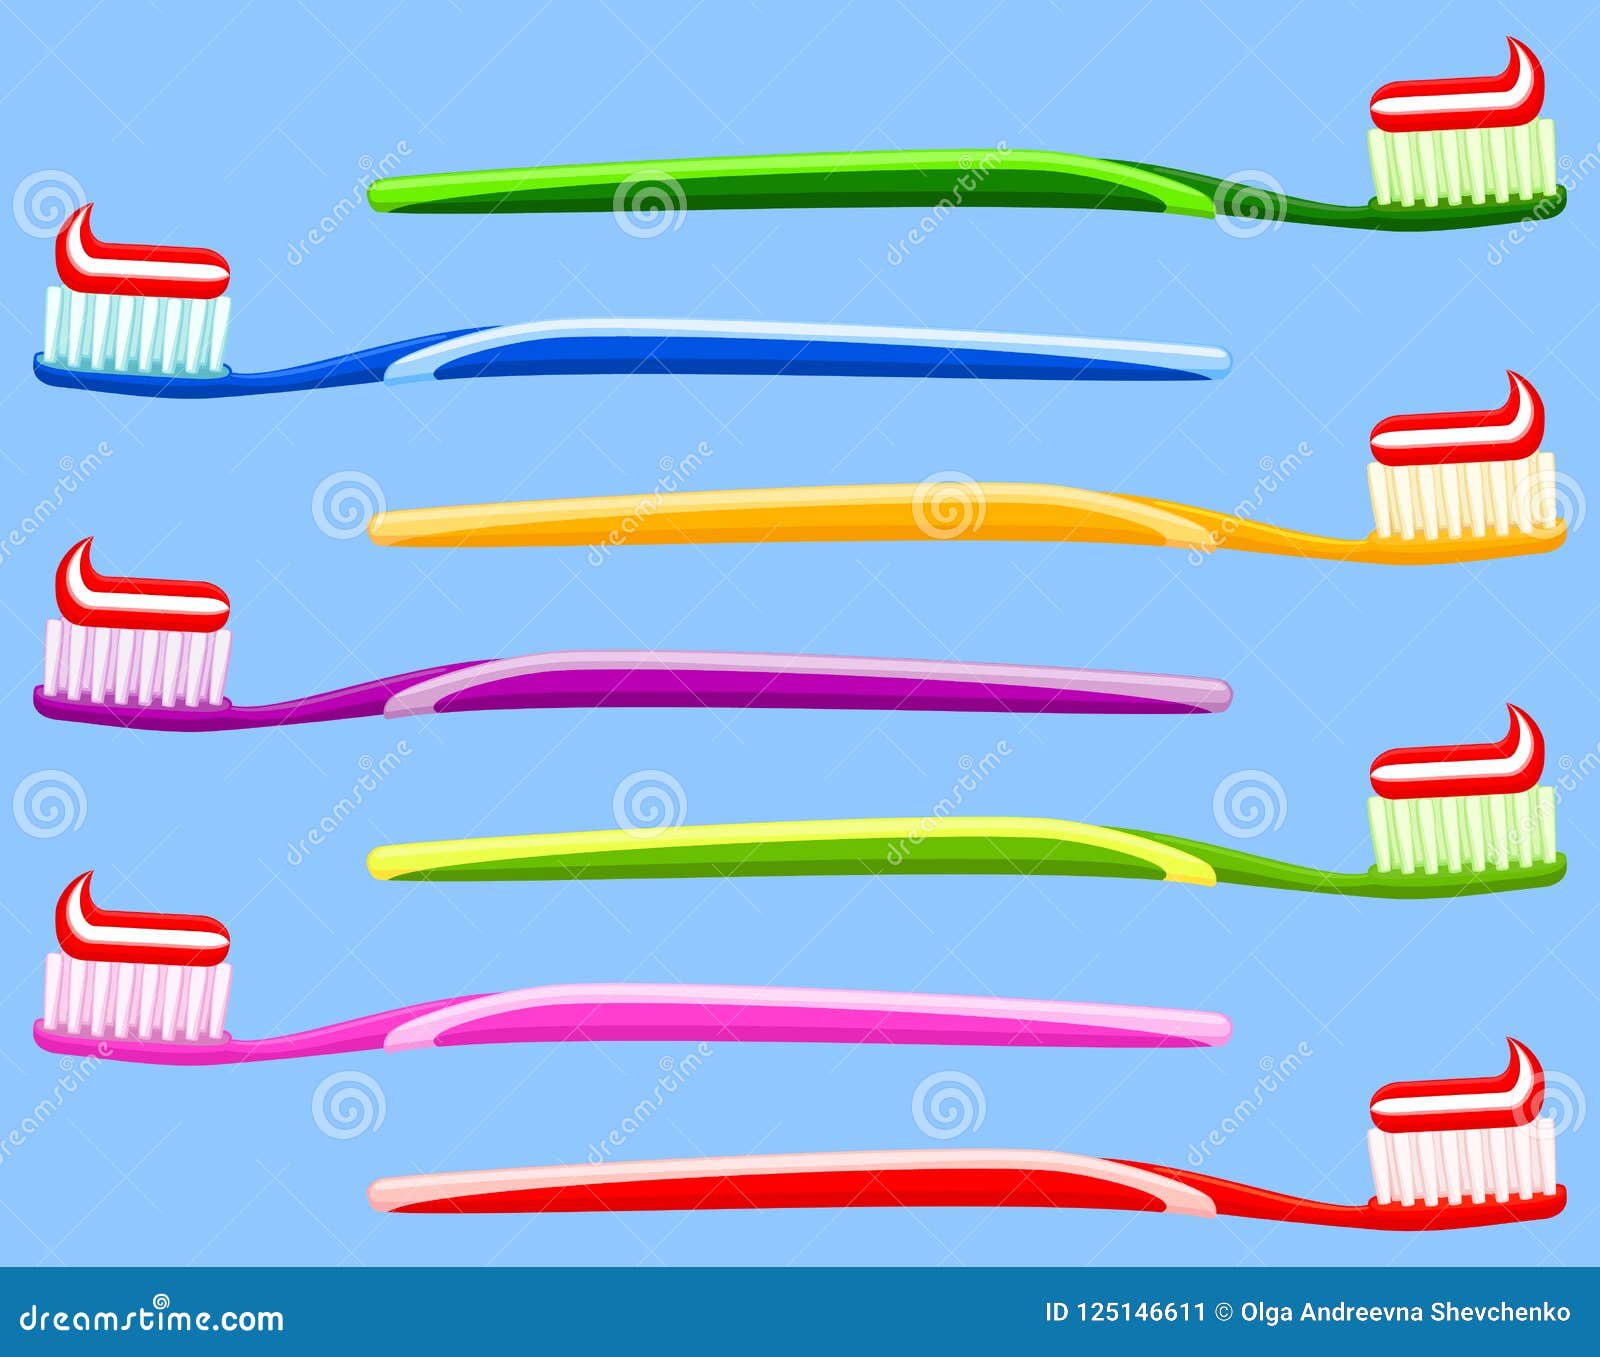 Cartoon Toothbrush Toothpaste Stock Illustrations – 9,040 Cartoon  Toothbrush Toothpaste Stock Illustrations, Vectors & Clipart - Dreamstime